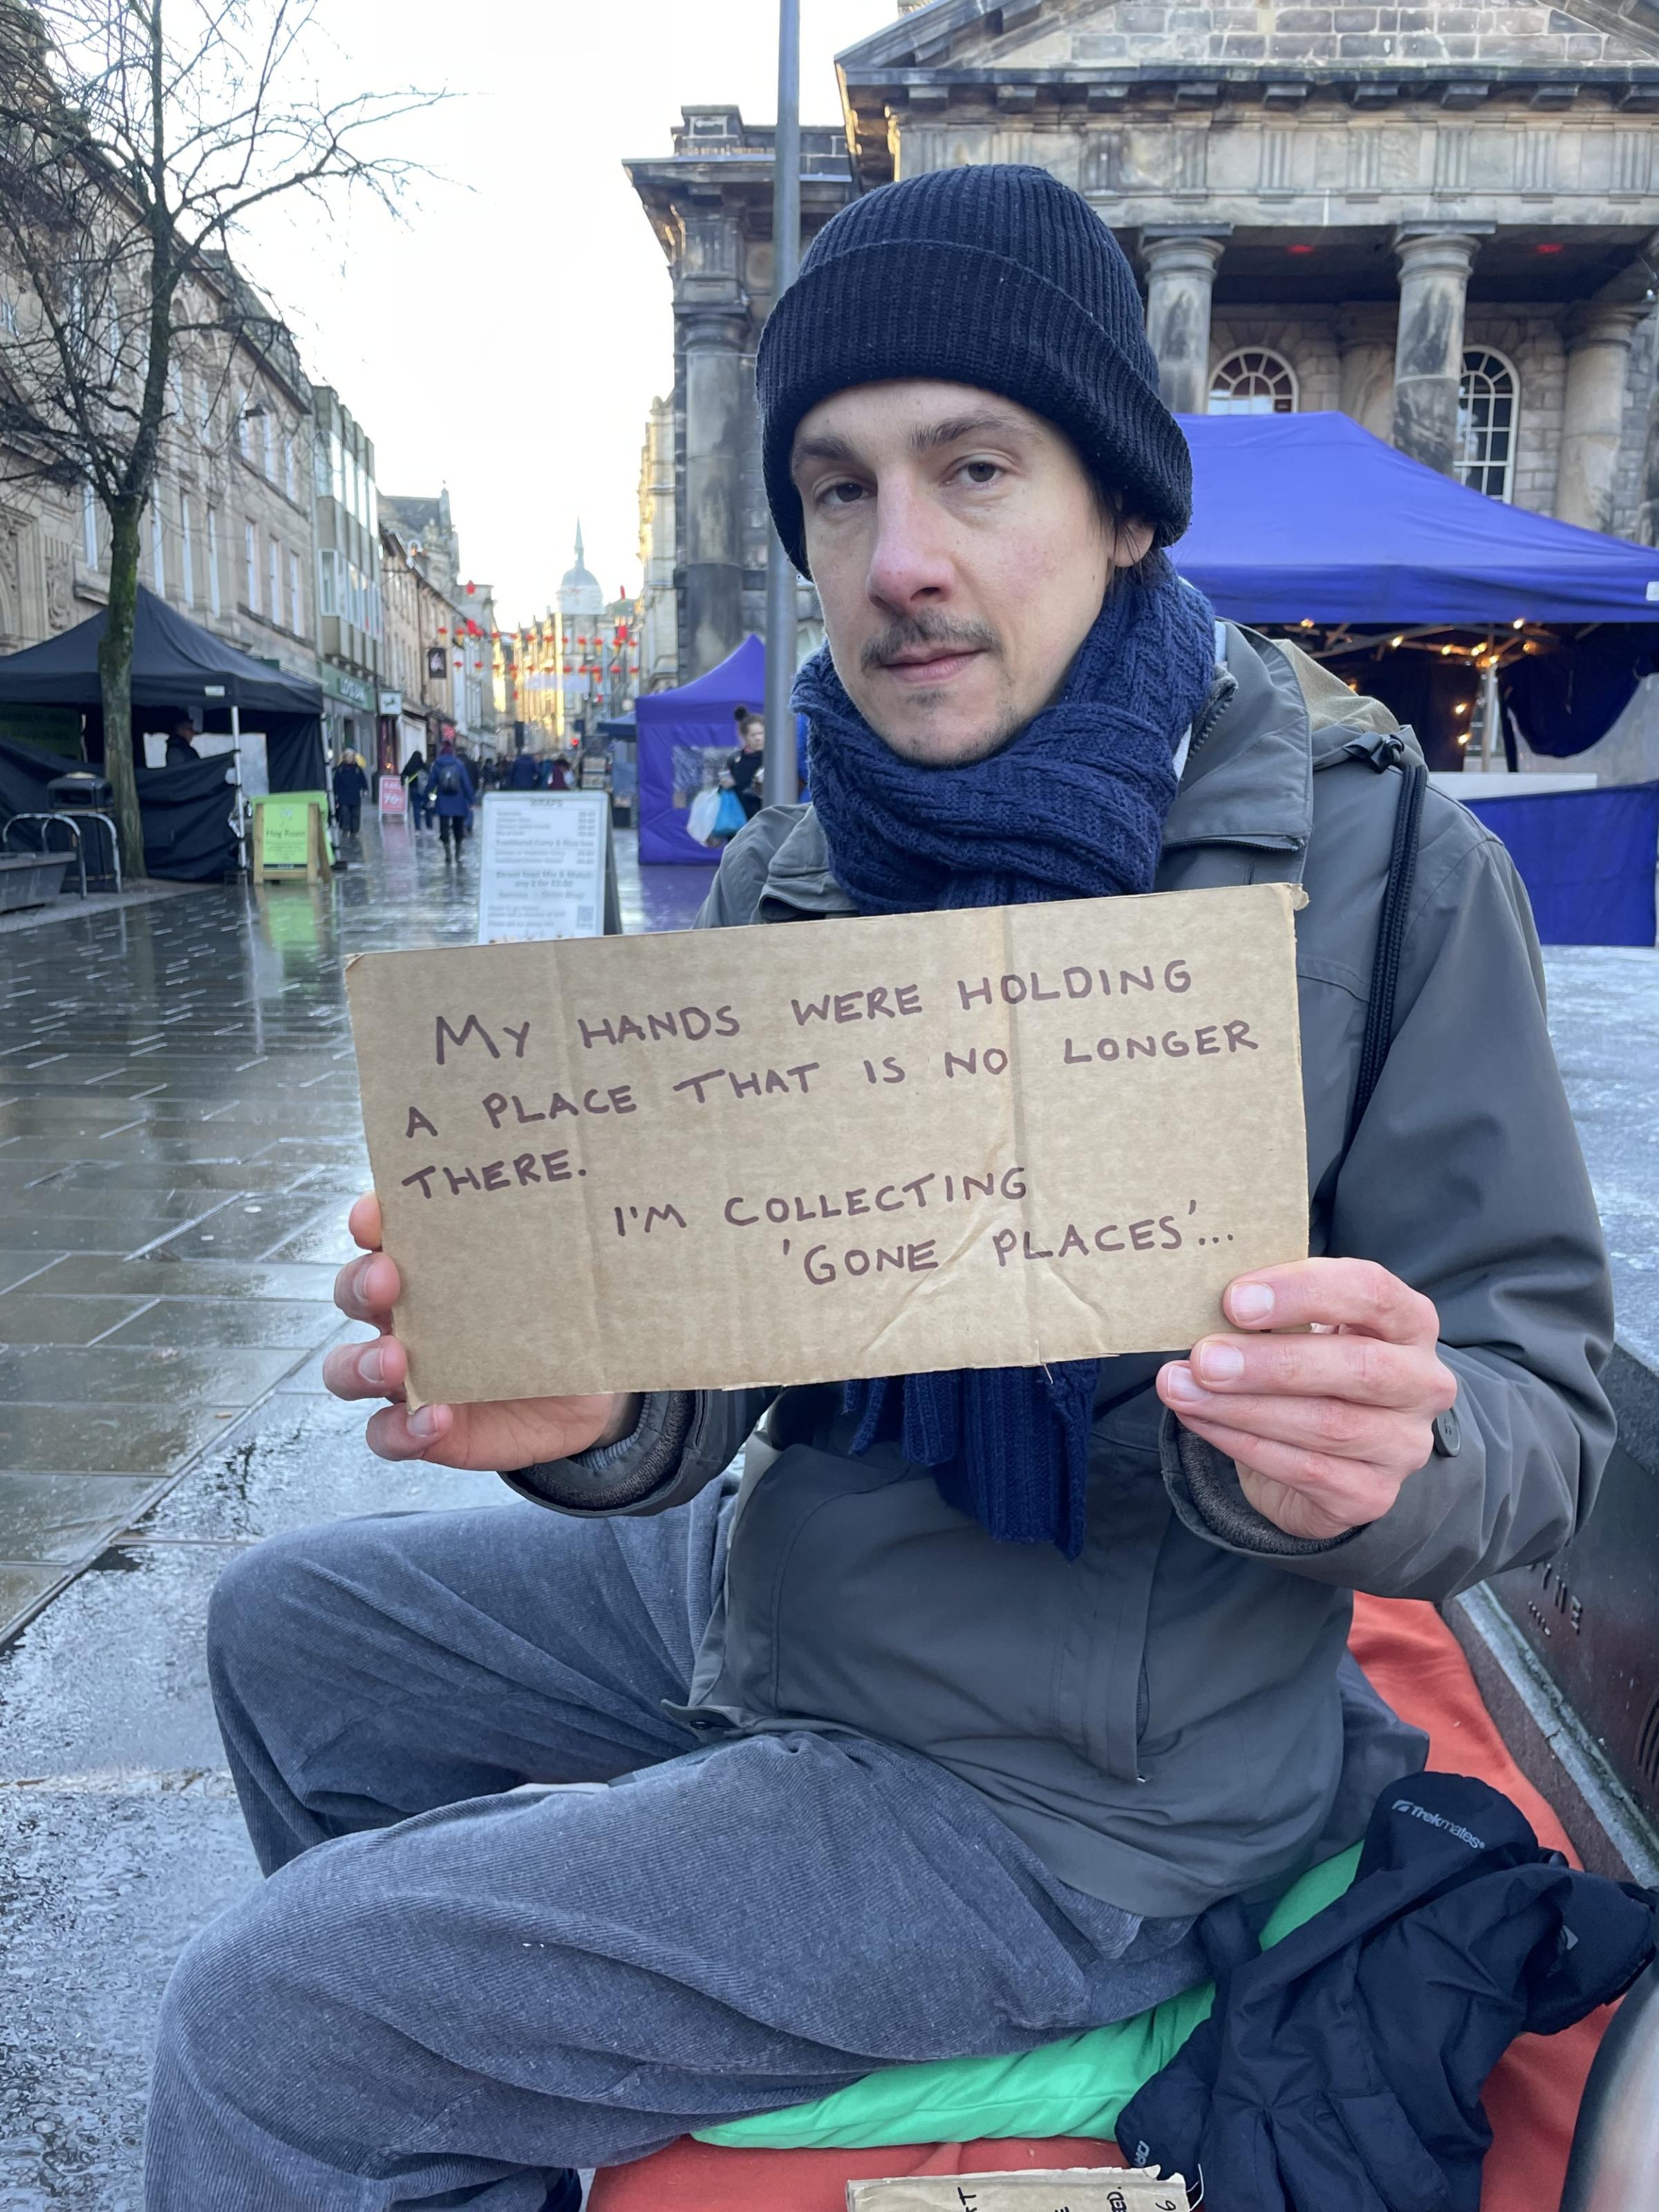 A man holding a cardboard sign that says "My hands were holding a place that is no longer there. I'm collecting 'Gone Places'.